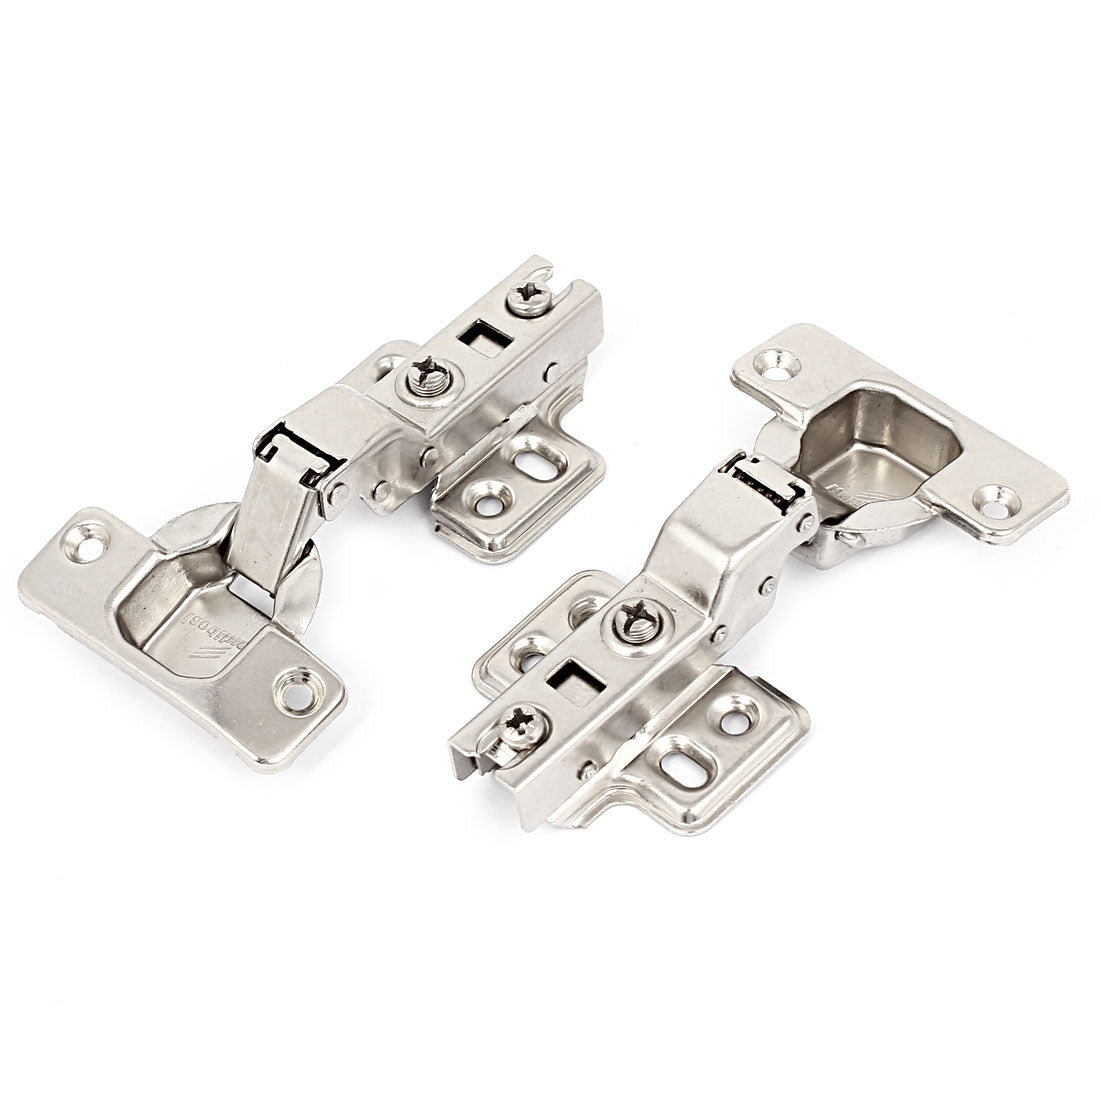 uxcell Uxcell Cupboard Drawer Door Hydraulic Buffer Damper Inset Concealed Hinge 2 Pcs